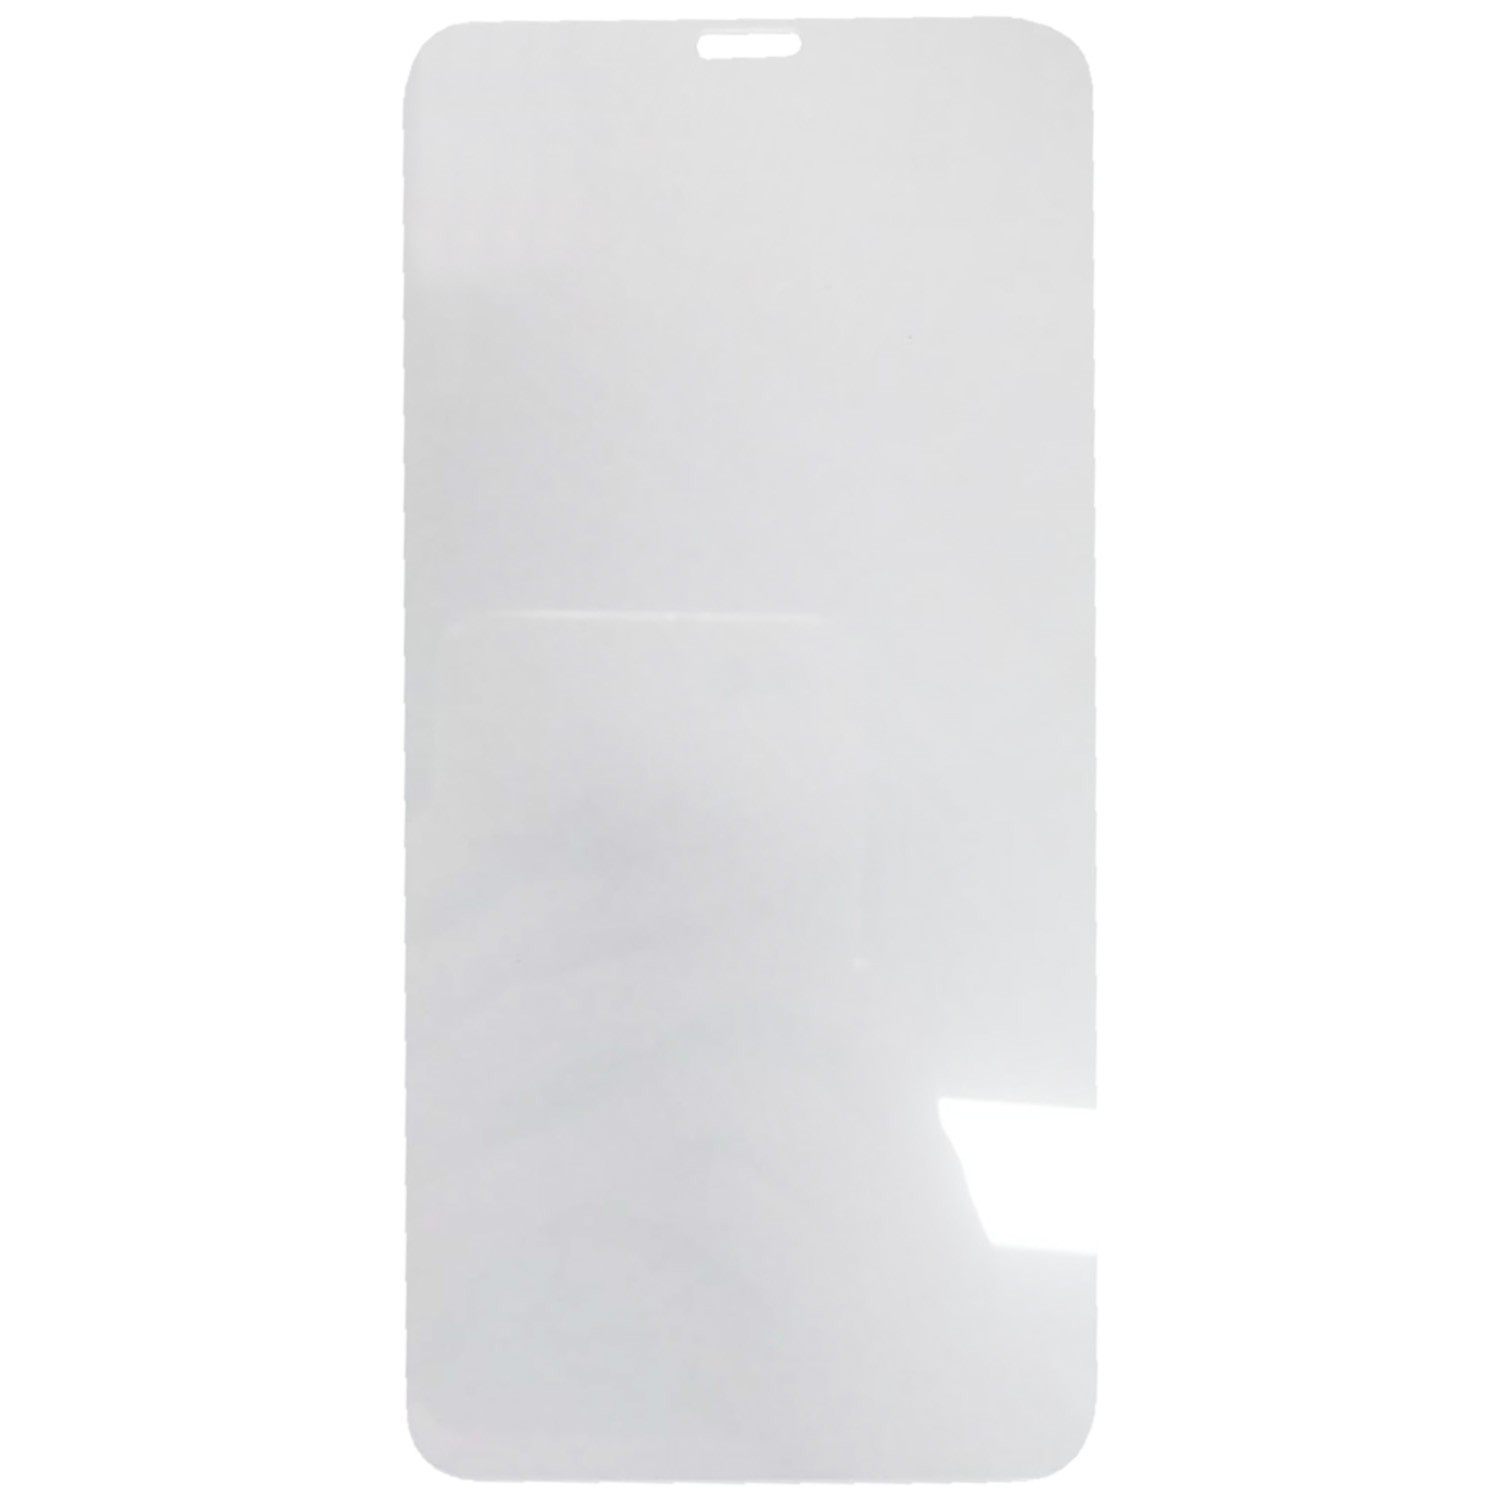 Pack of 2 iPhone X/XS/11 Pro Screen Protectors Image